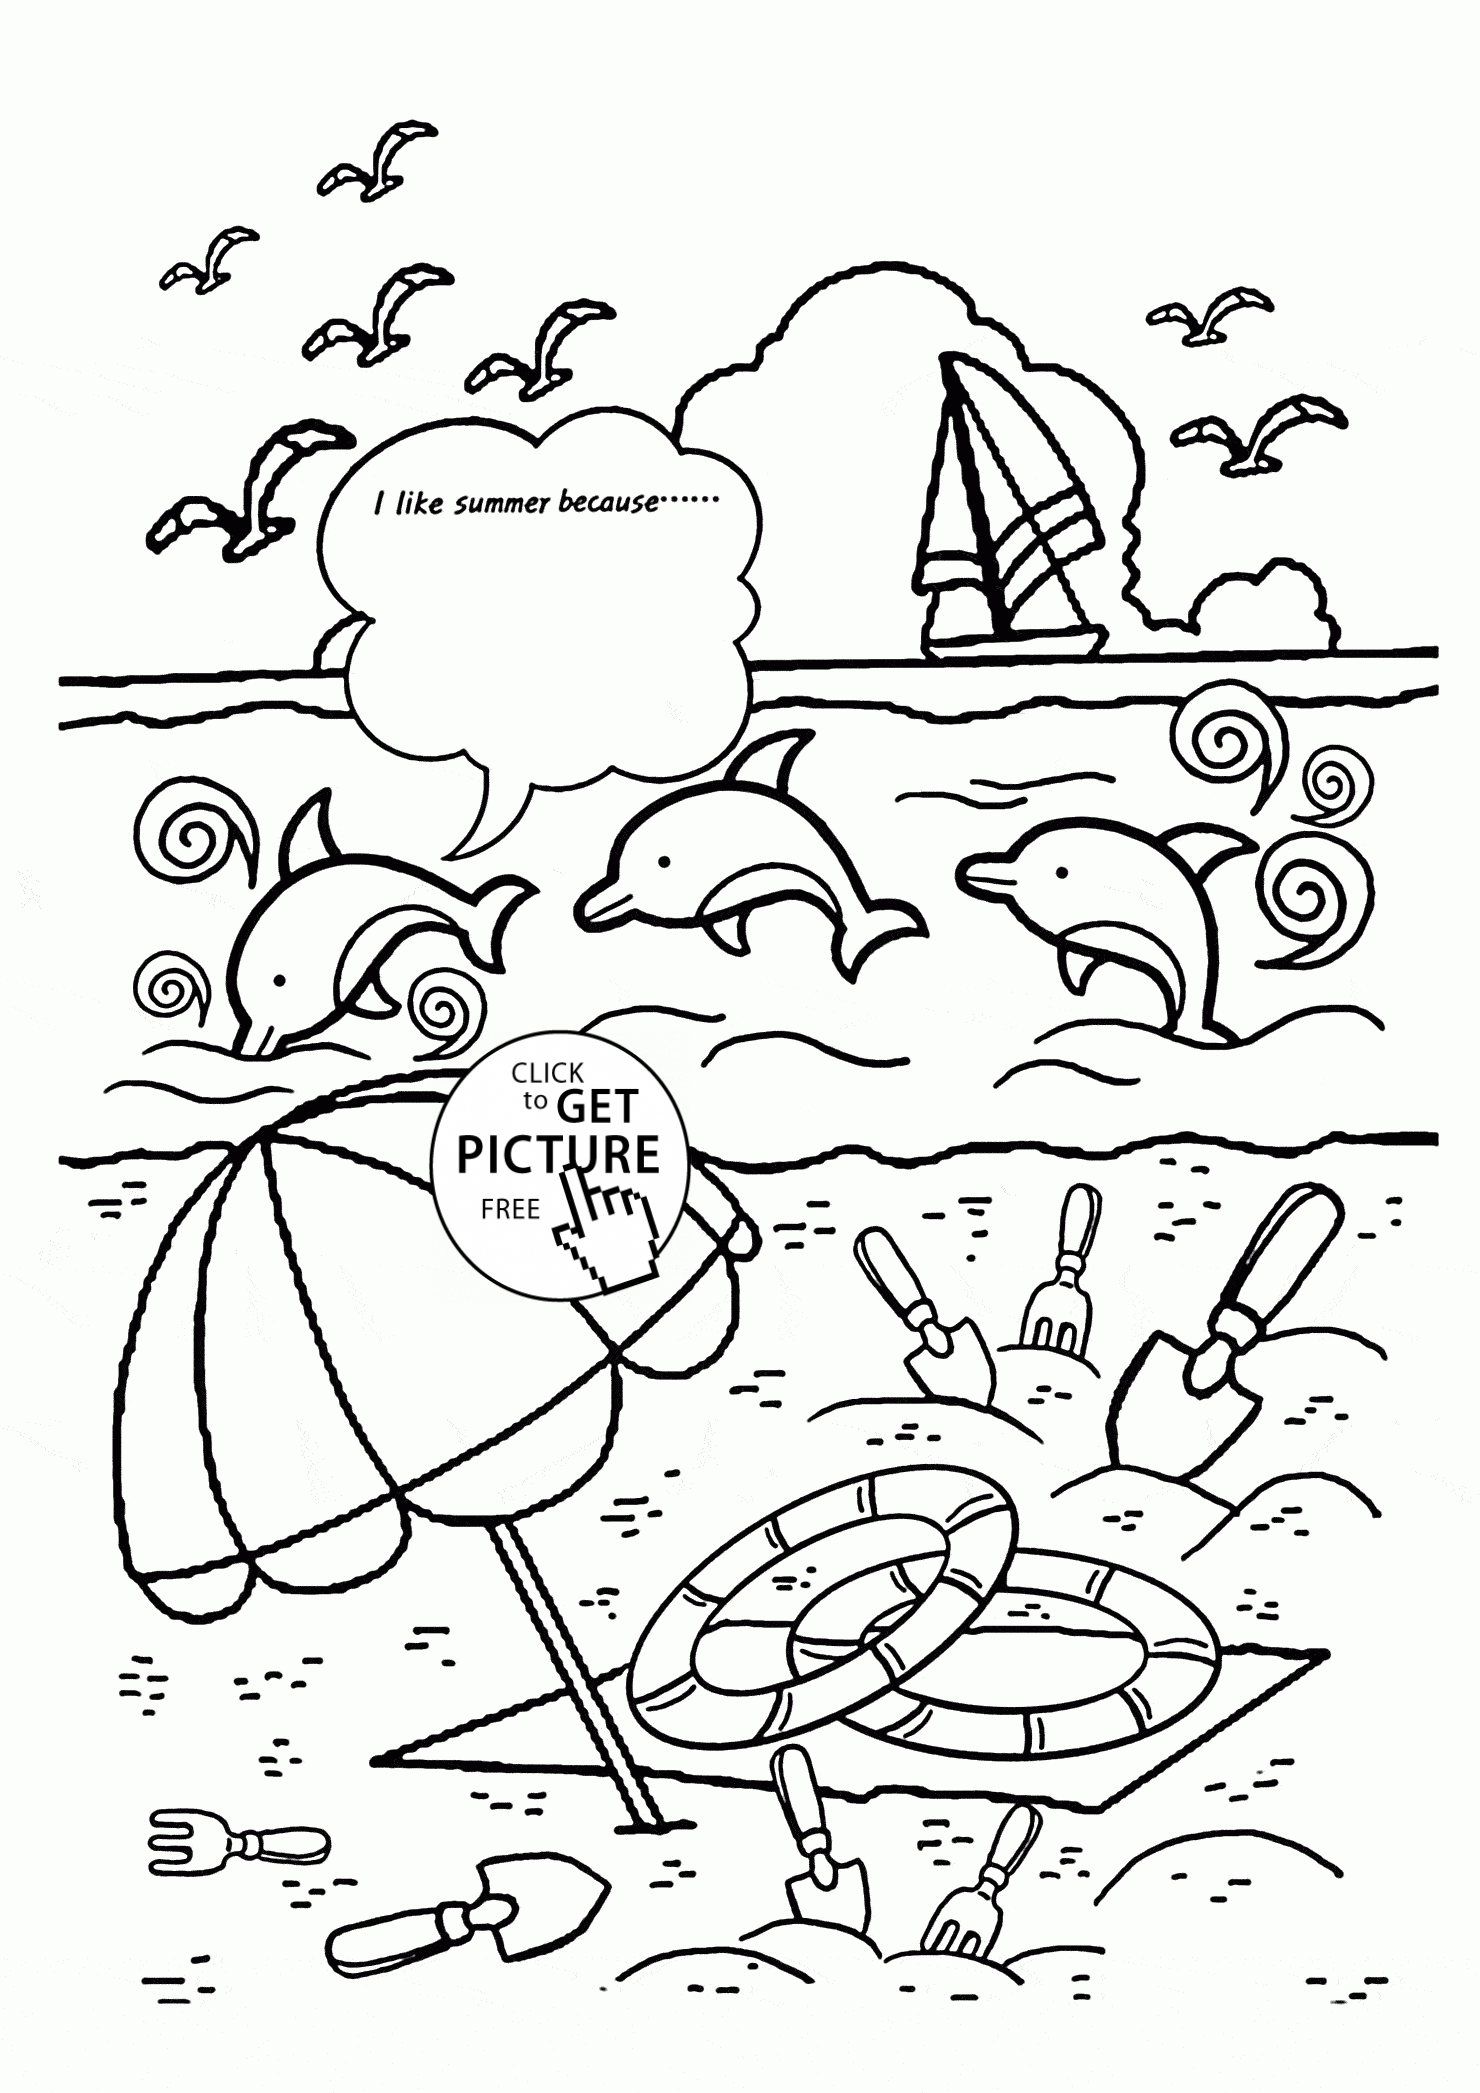 summer fun coloring book pages. beach in summer coloring page for ...